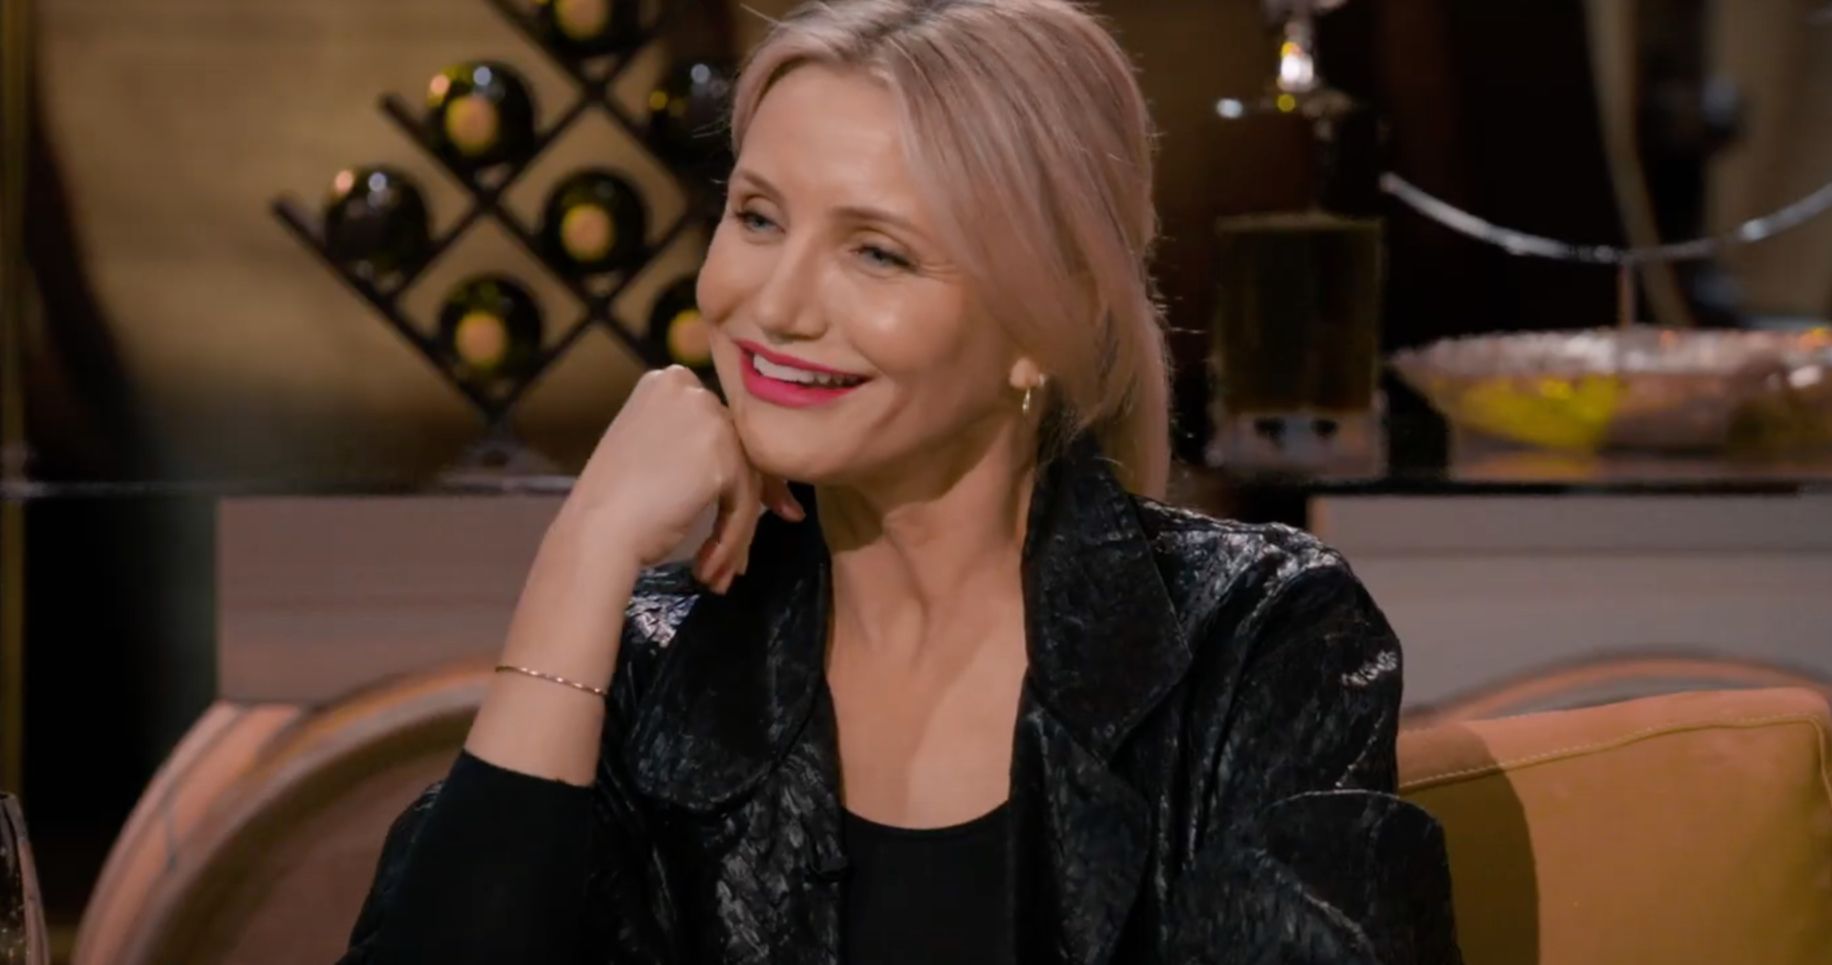 Cameron Diaz Says She Feels 'Whole' After Acting Retirement